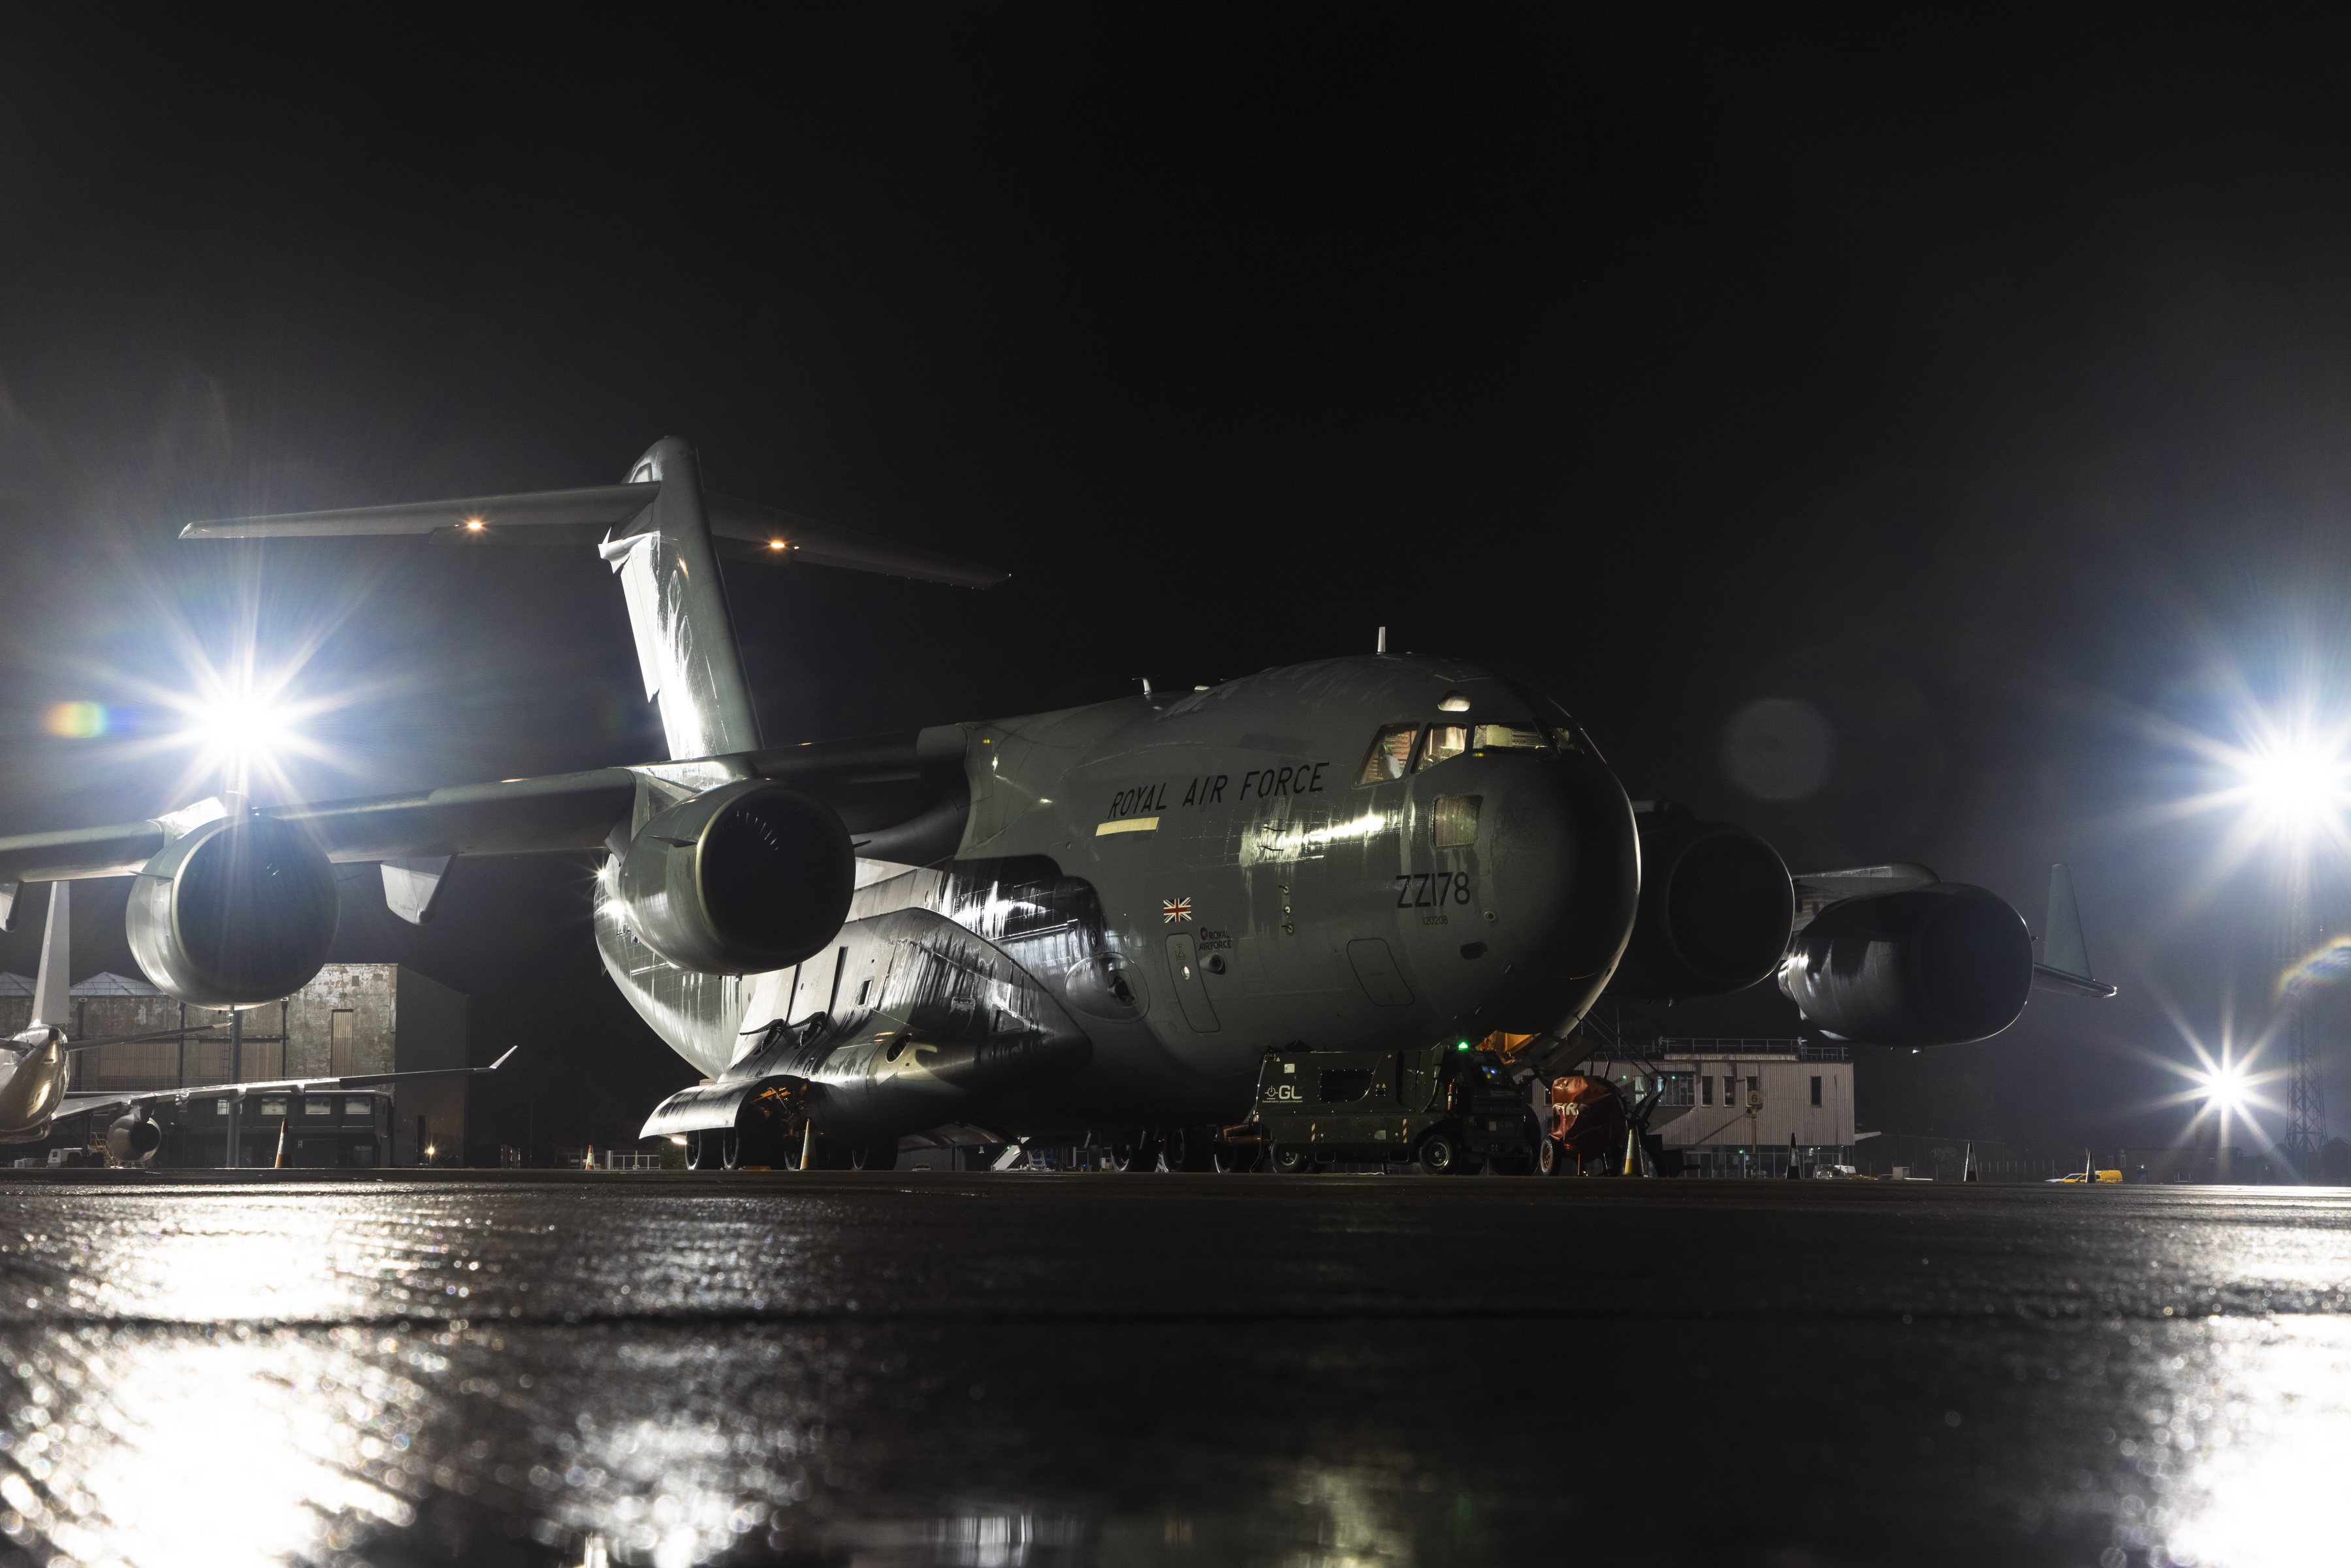 A400M ready to leave, on the runway at night.